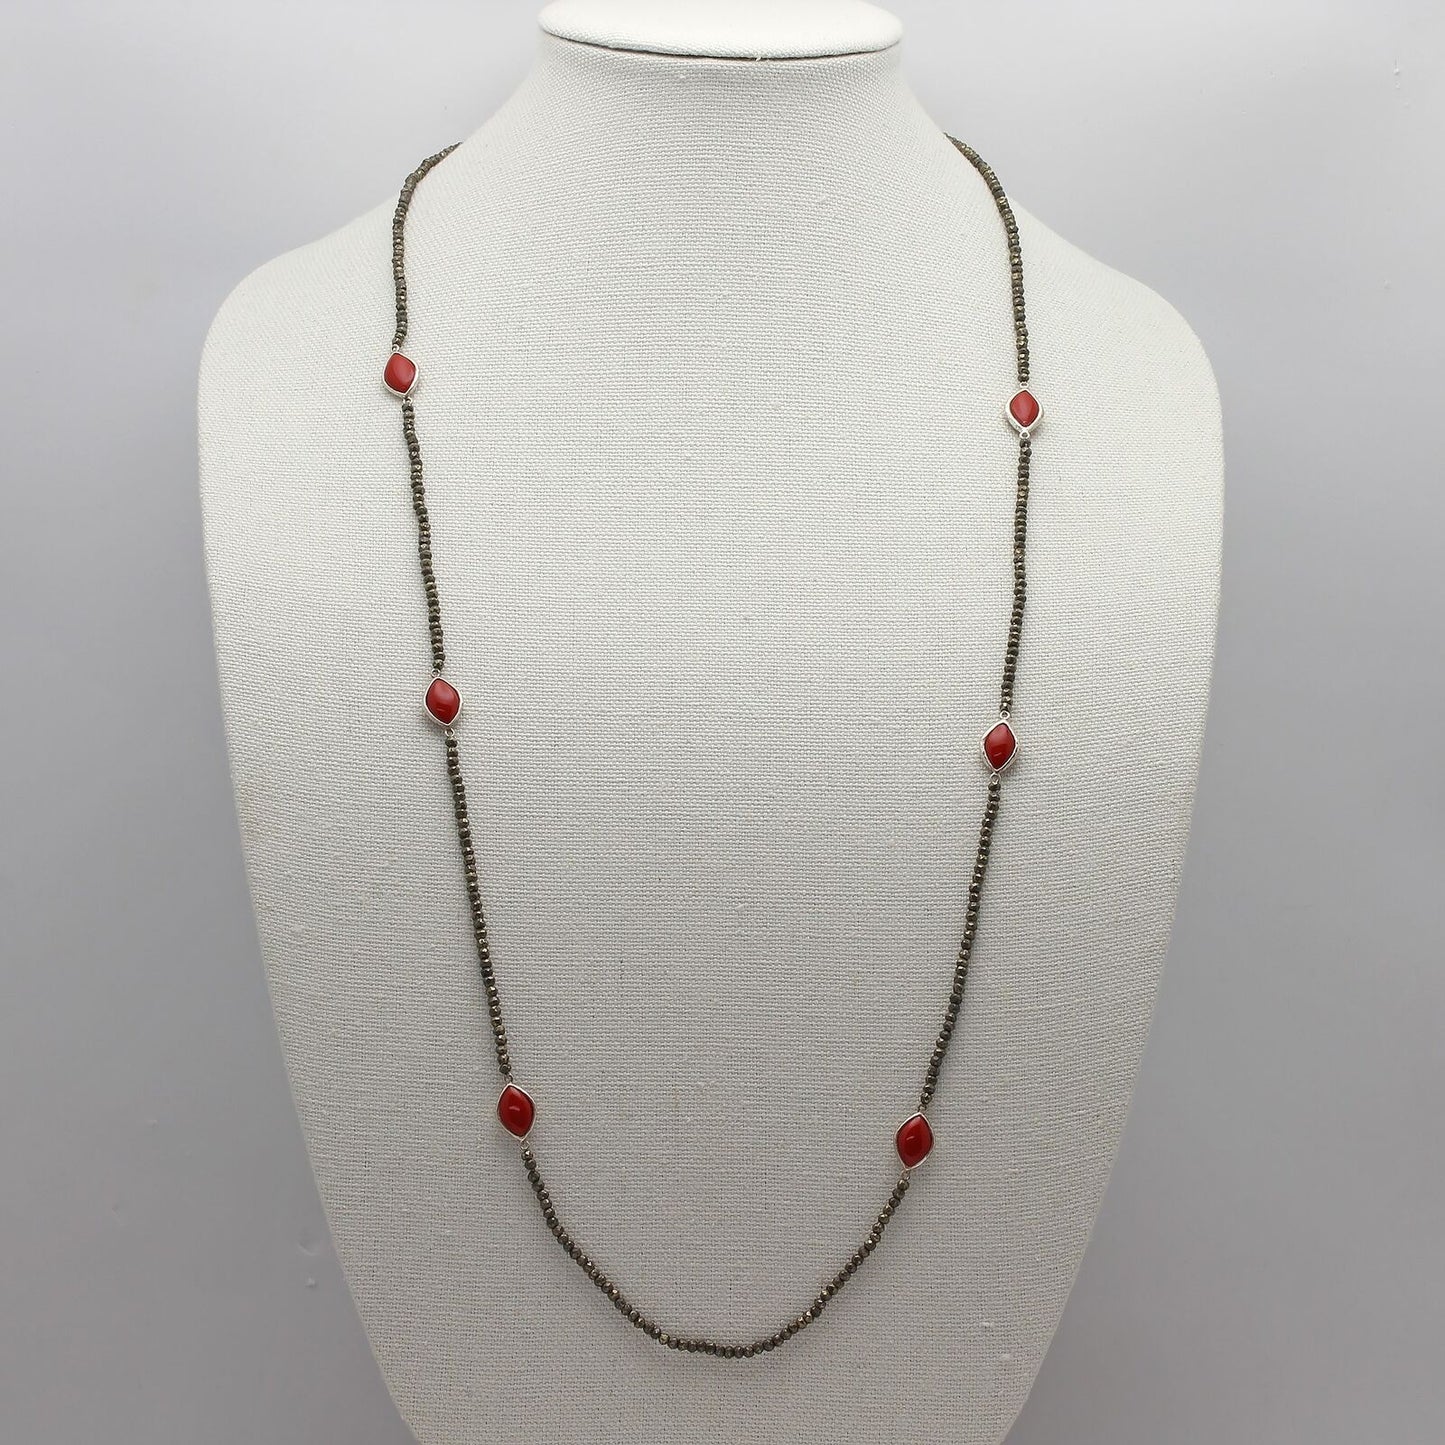 RARE Retired Silpada 36" Sterling Faceted Pyrite Bead Red Glass Station Necklace